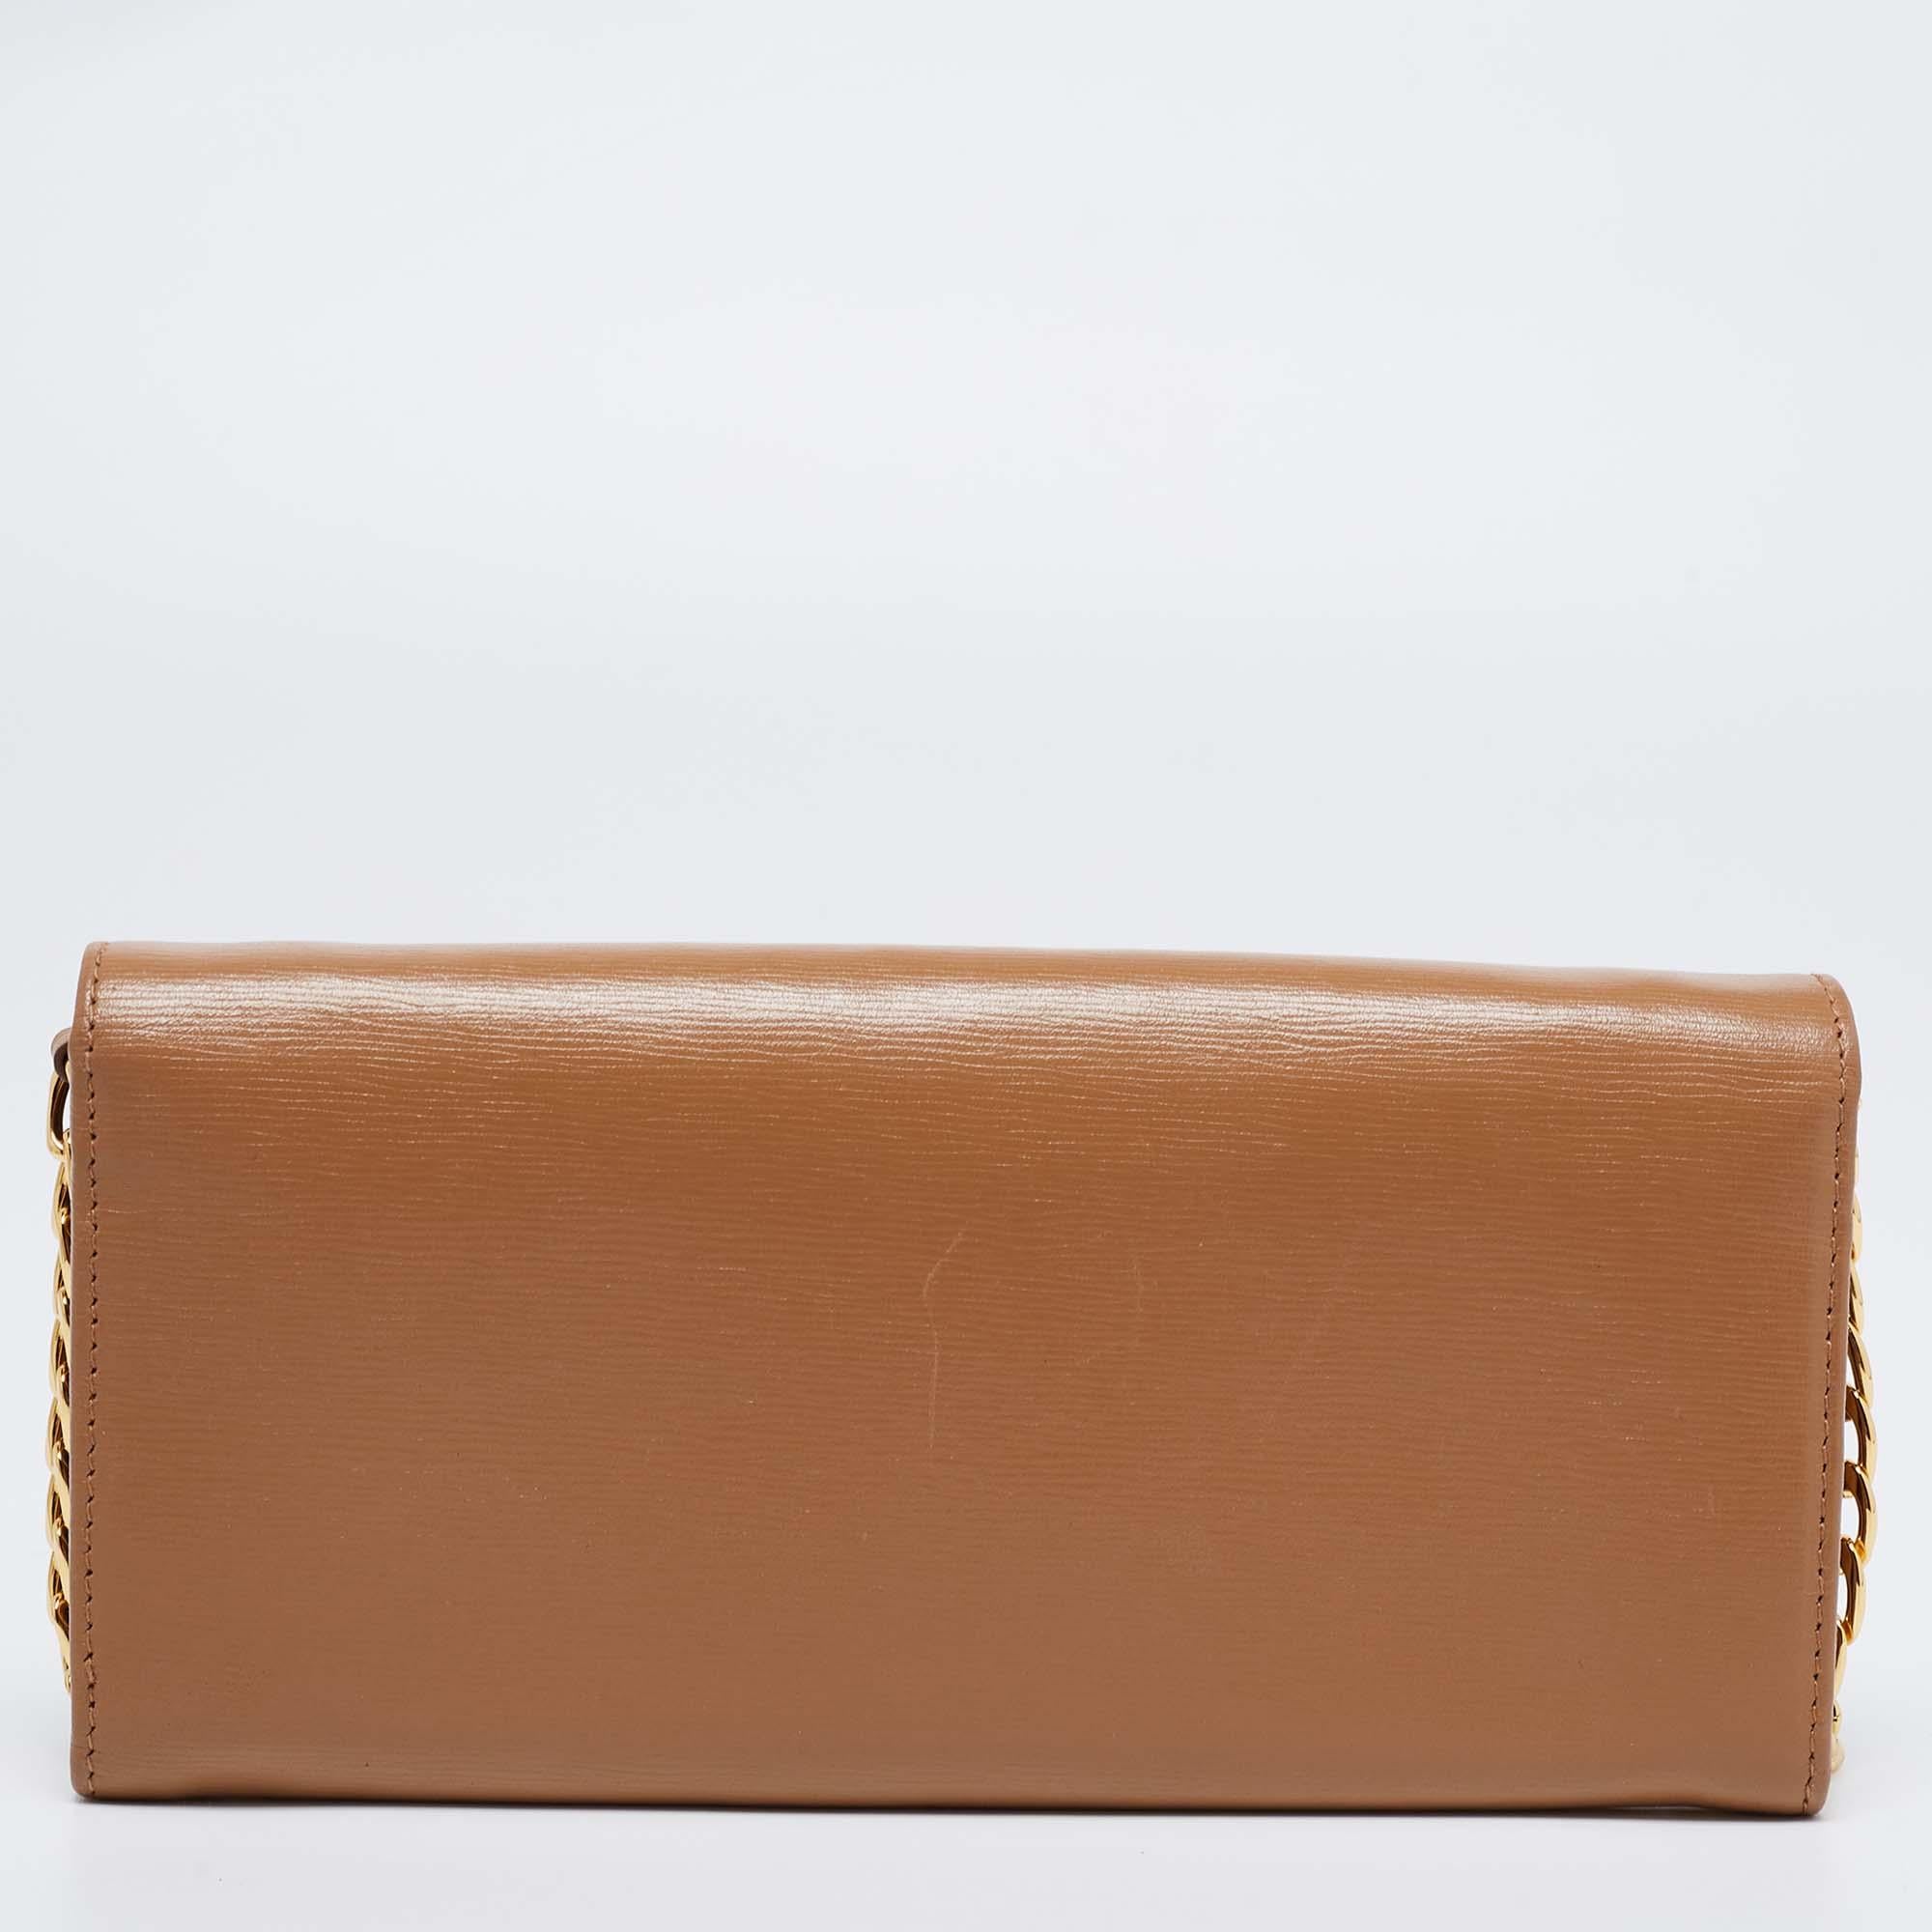 Get the assurance of quality and style that never fades with this Prada Wallet On Chain. It is sewn using beige Vitello Move leather, and the interior has a wallet-like layout with space for cards, cash, coins, phone, and keys. The Prada WOC is